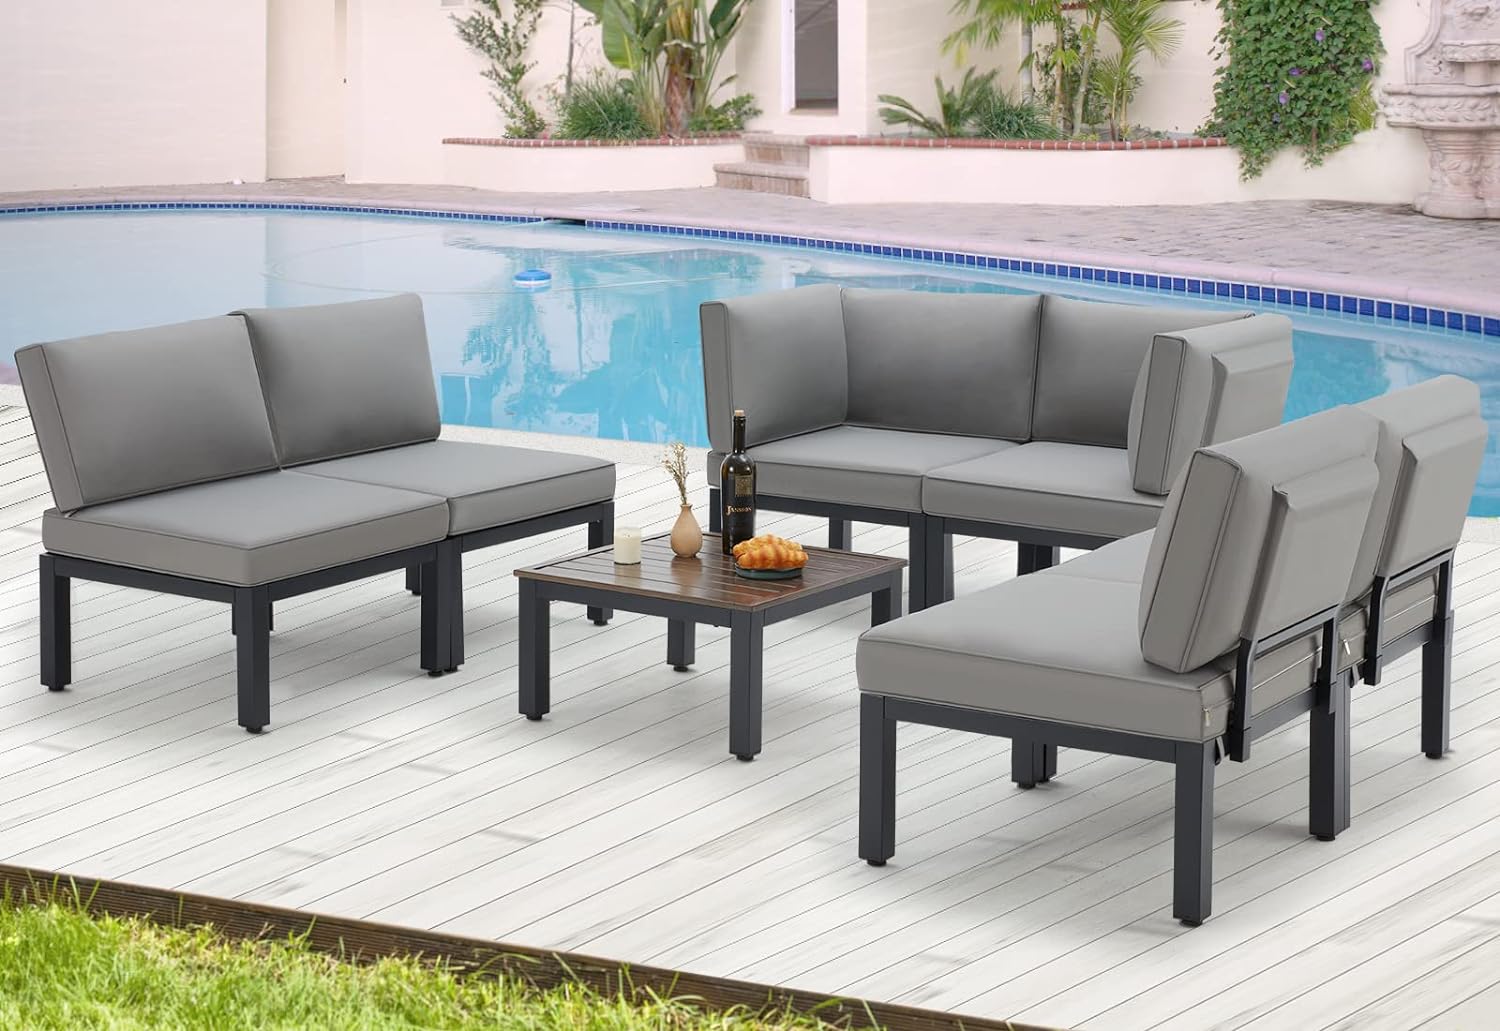 AECOJOY Outdoor Patio Furniture Set, Metal Patio Sectional Conversation Sofa, Black Wrought Iron Outdoor Furniture Sets Clearance with Grey Cushions